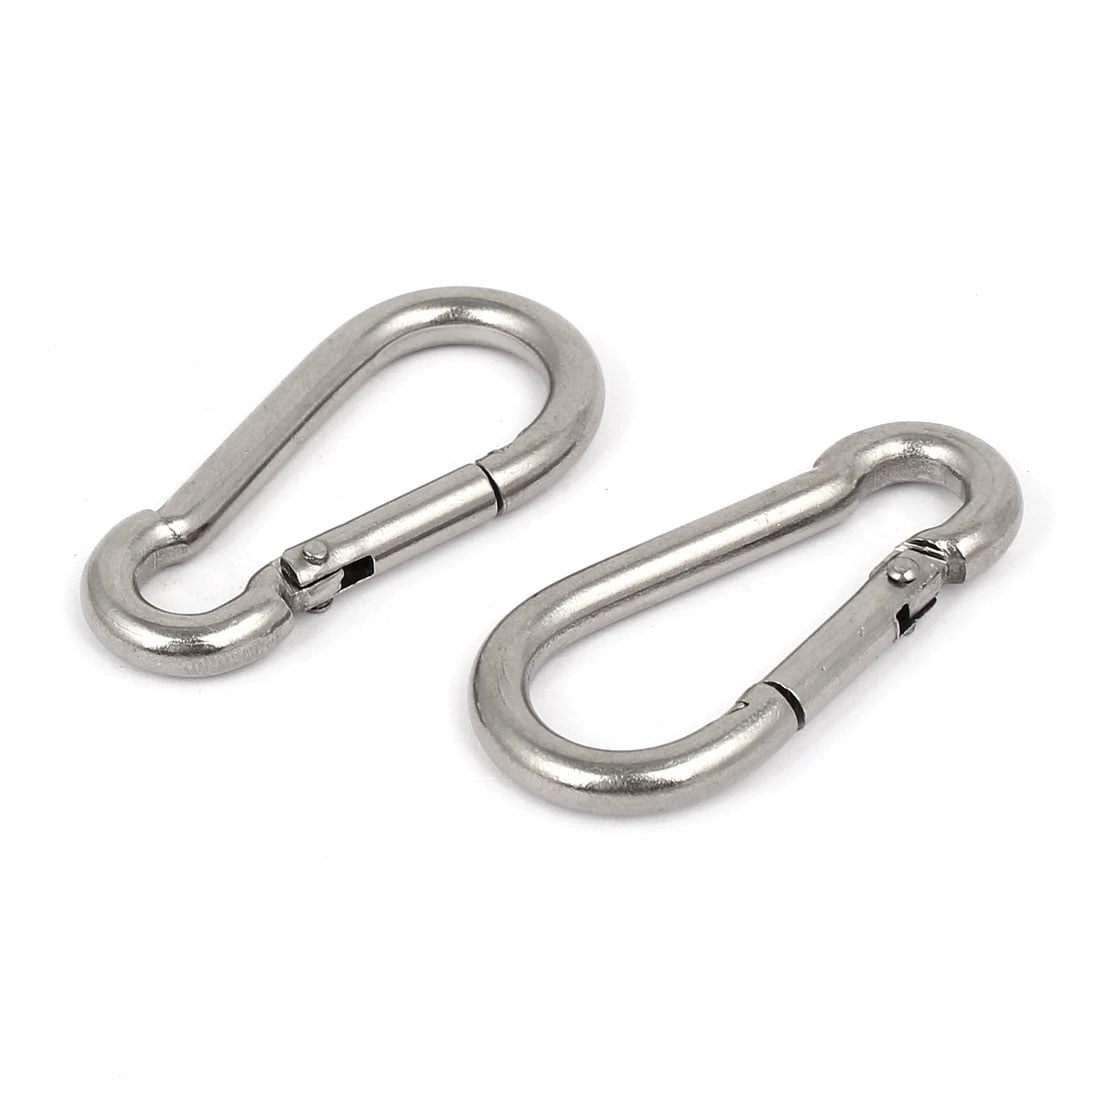 Uxcell M5 x 50mm 304 Stainless Steel Carabiner Spring Snap Link Hook 2PCS 